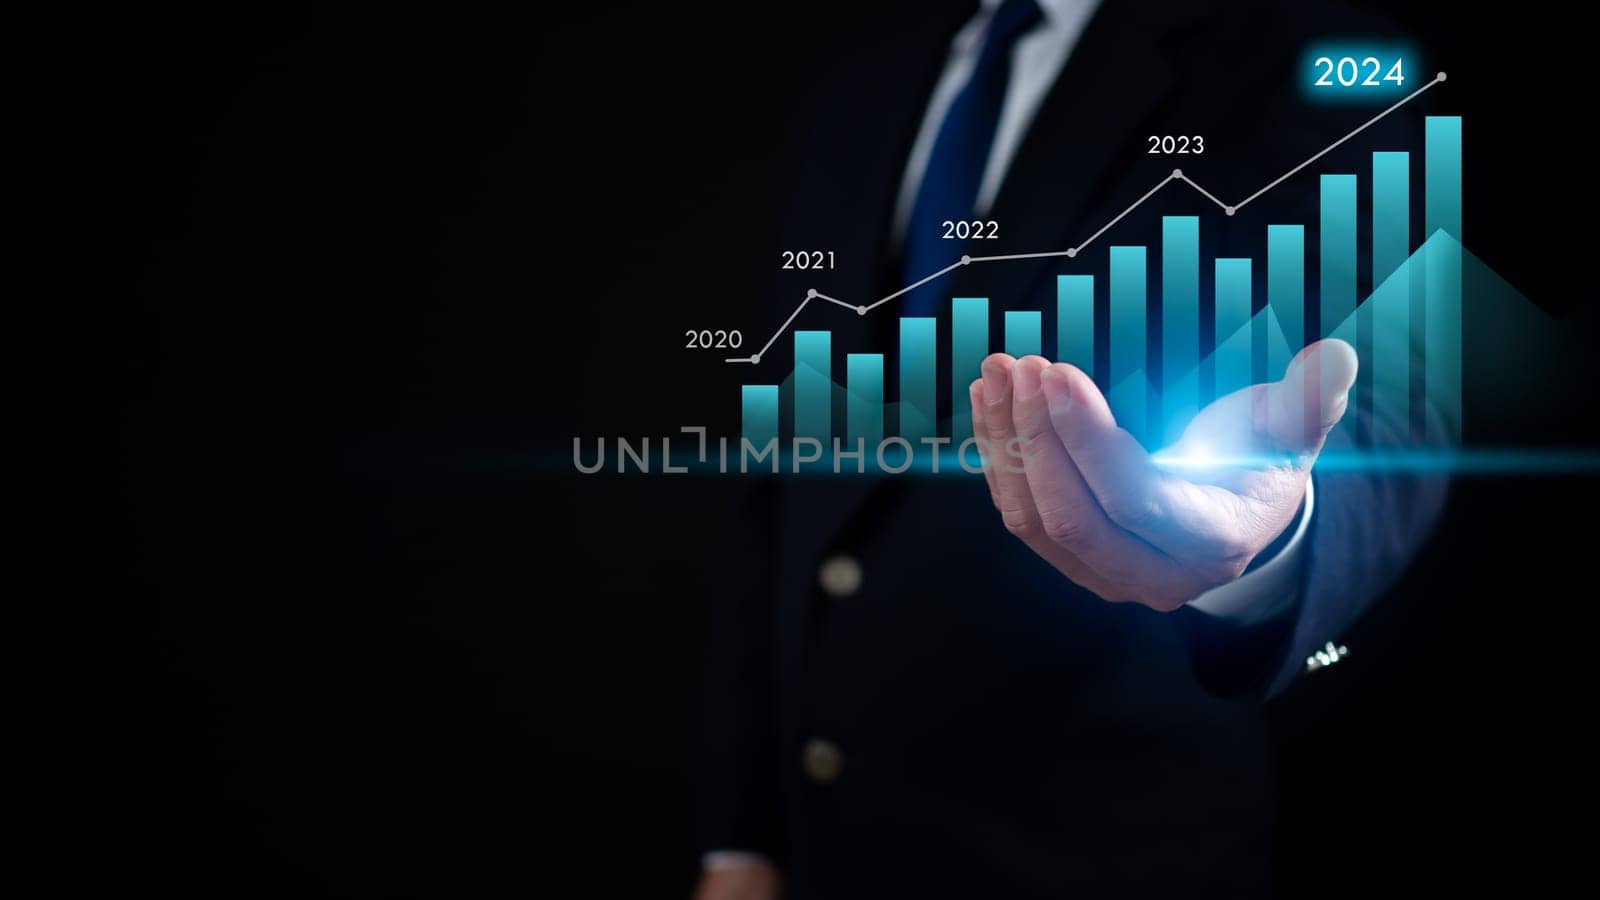 Stock trading. Finance. Investing. Growing business. Businessman in a suit is holding a virtual graph It represents growth of stocks and business in 2024. by Unimages2527